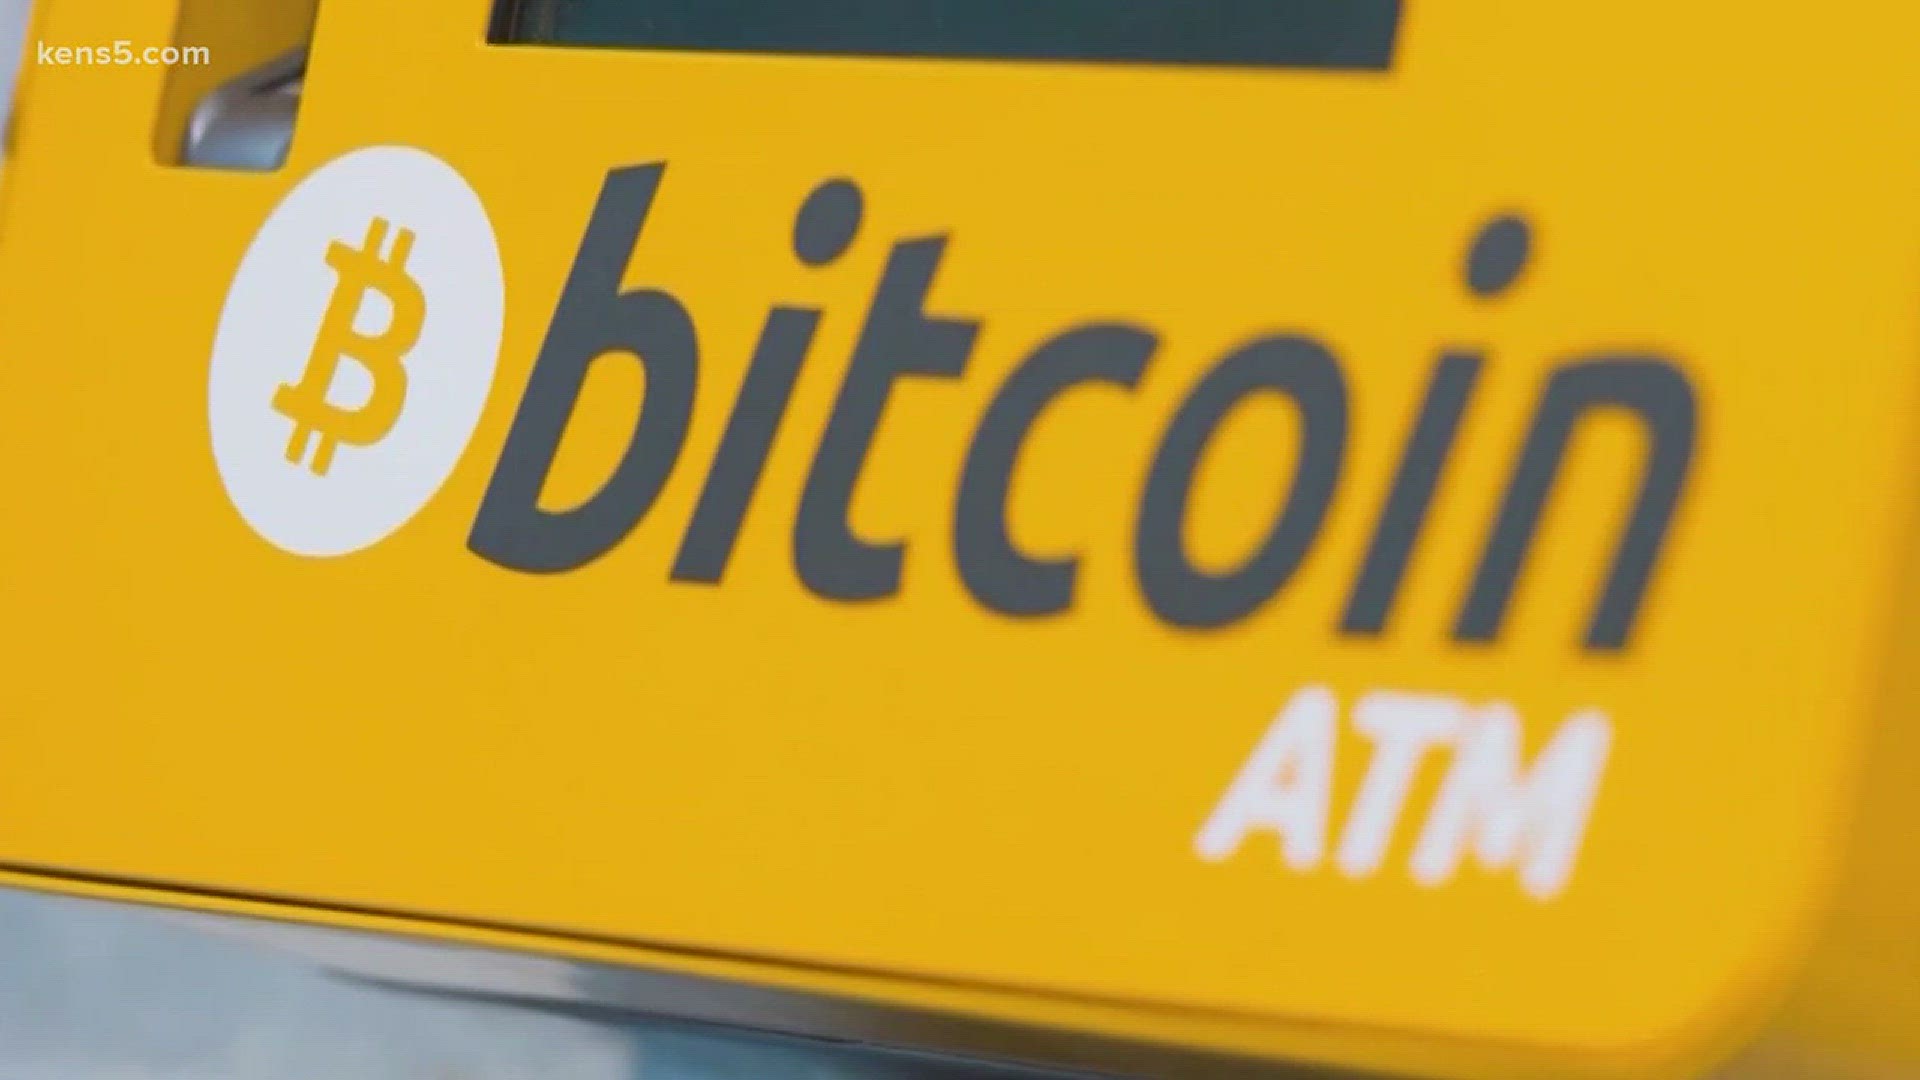 It's the hottest currency in the world right now, but could the bitcoin bubble burst? Investment advisor Karl Eggerss from Eggerss Captial Management joins KENS 5 to discuss the bitcoin boom.